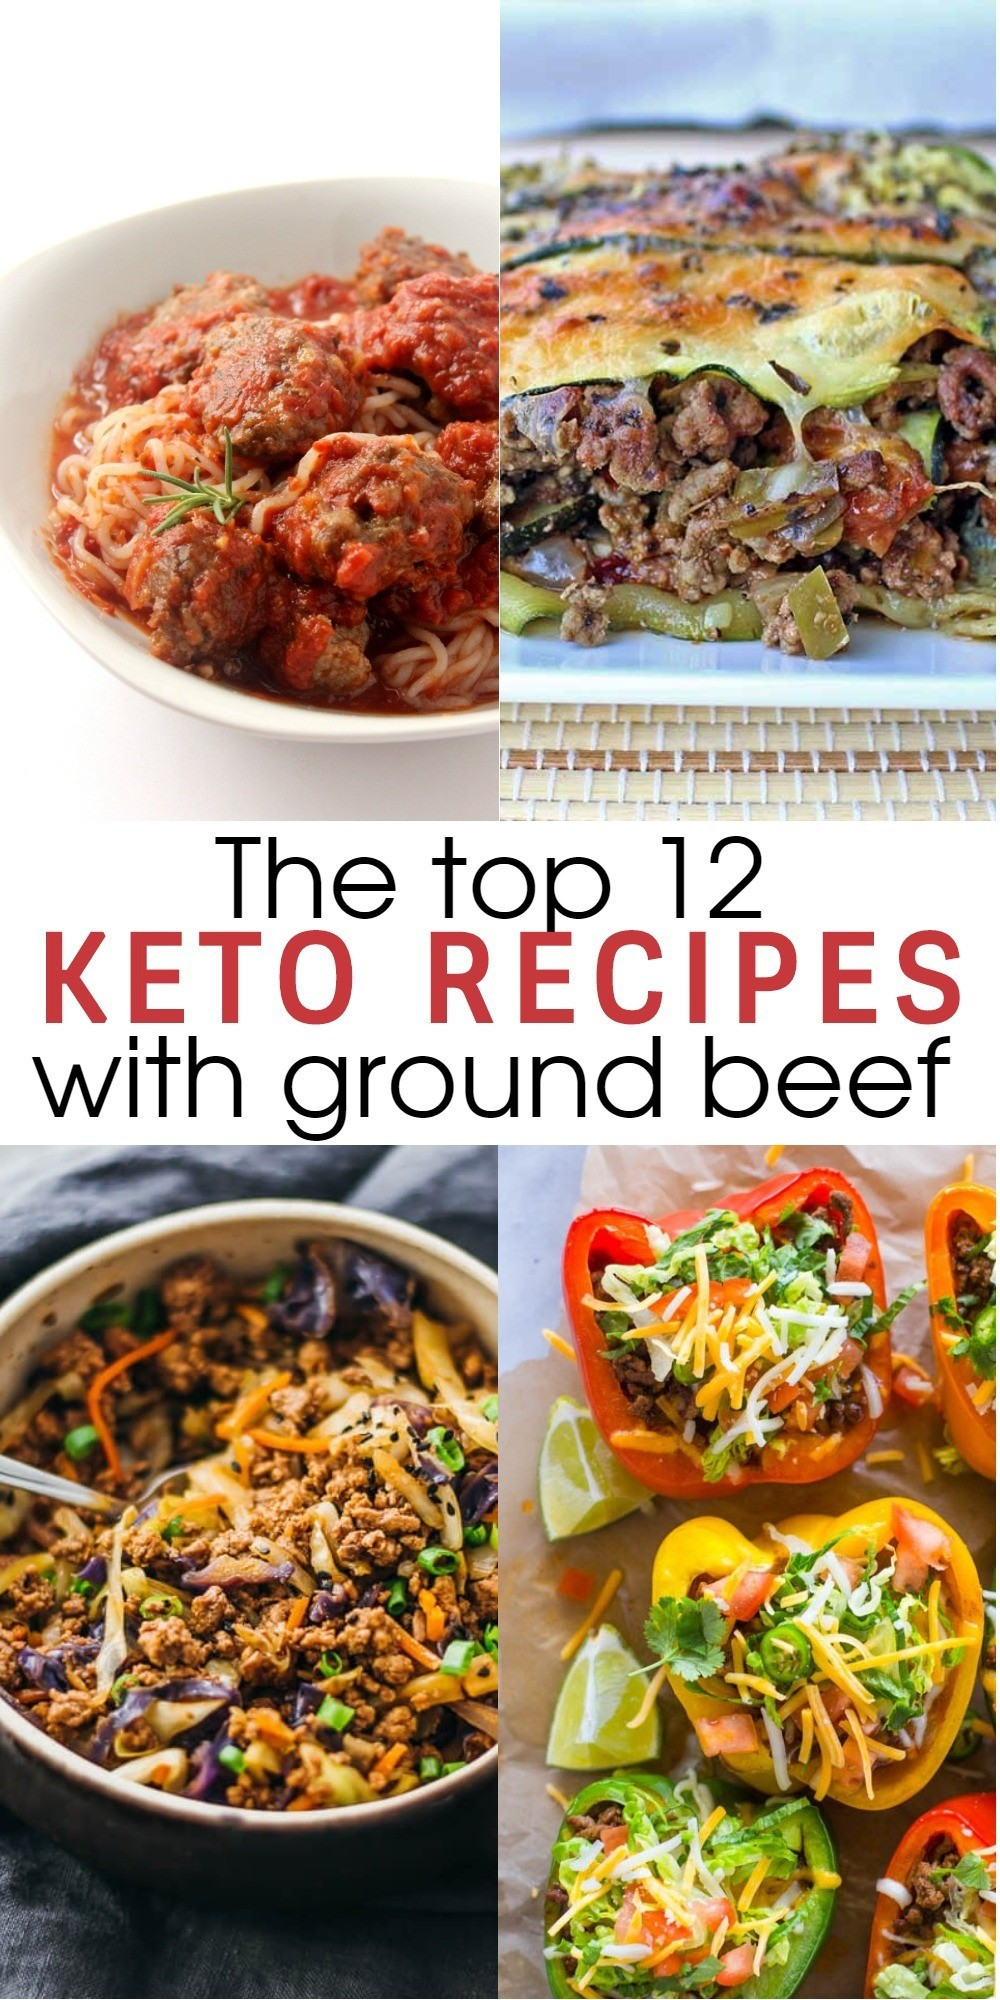 Easy Dinner Recipes With Ground Beef Keto
 12 Flavorful and Easy Keto Recipes With Ground Beef To Try